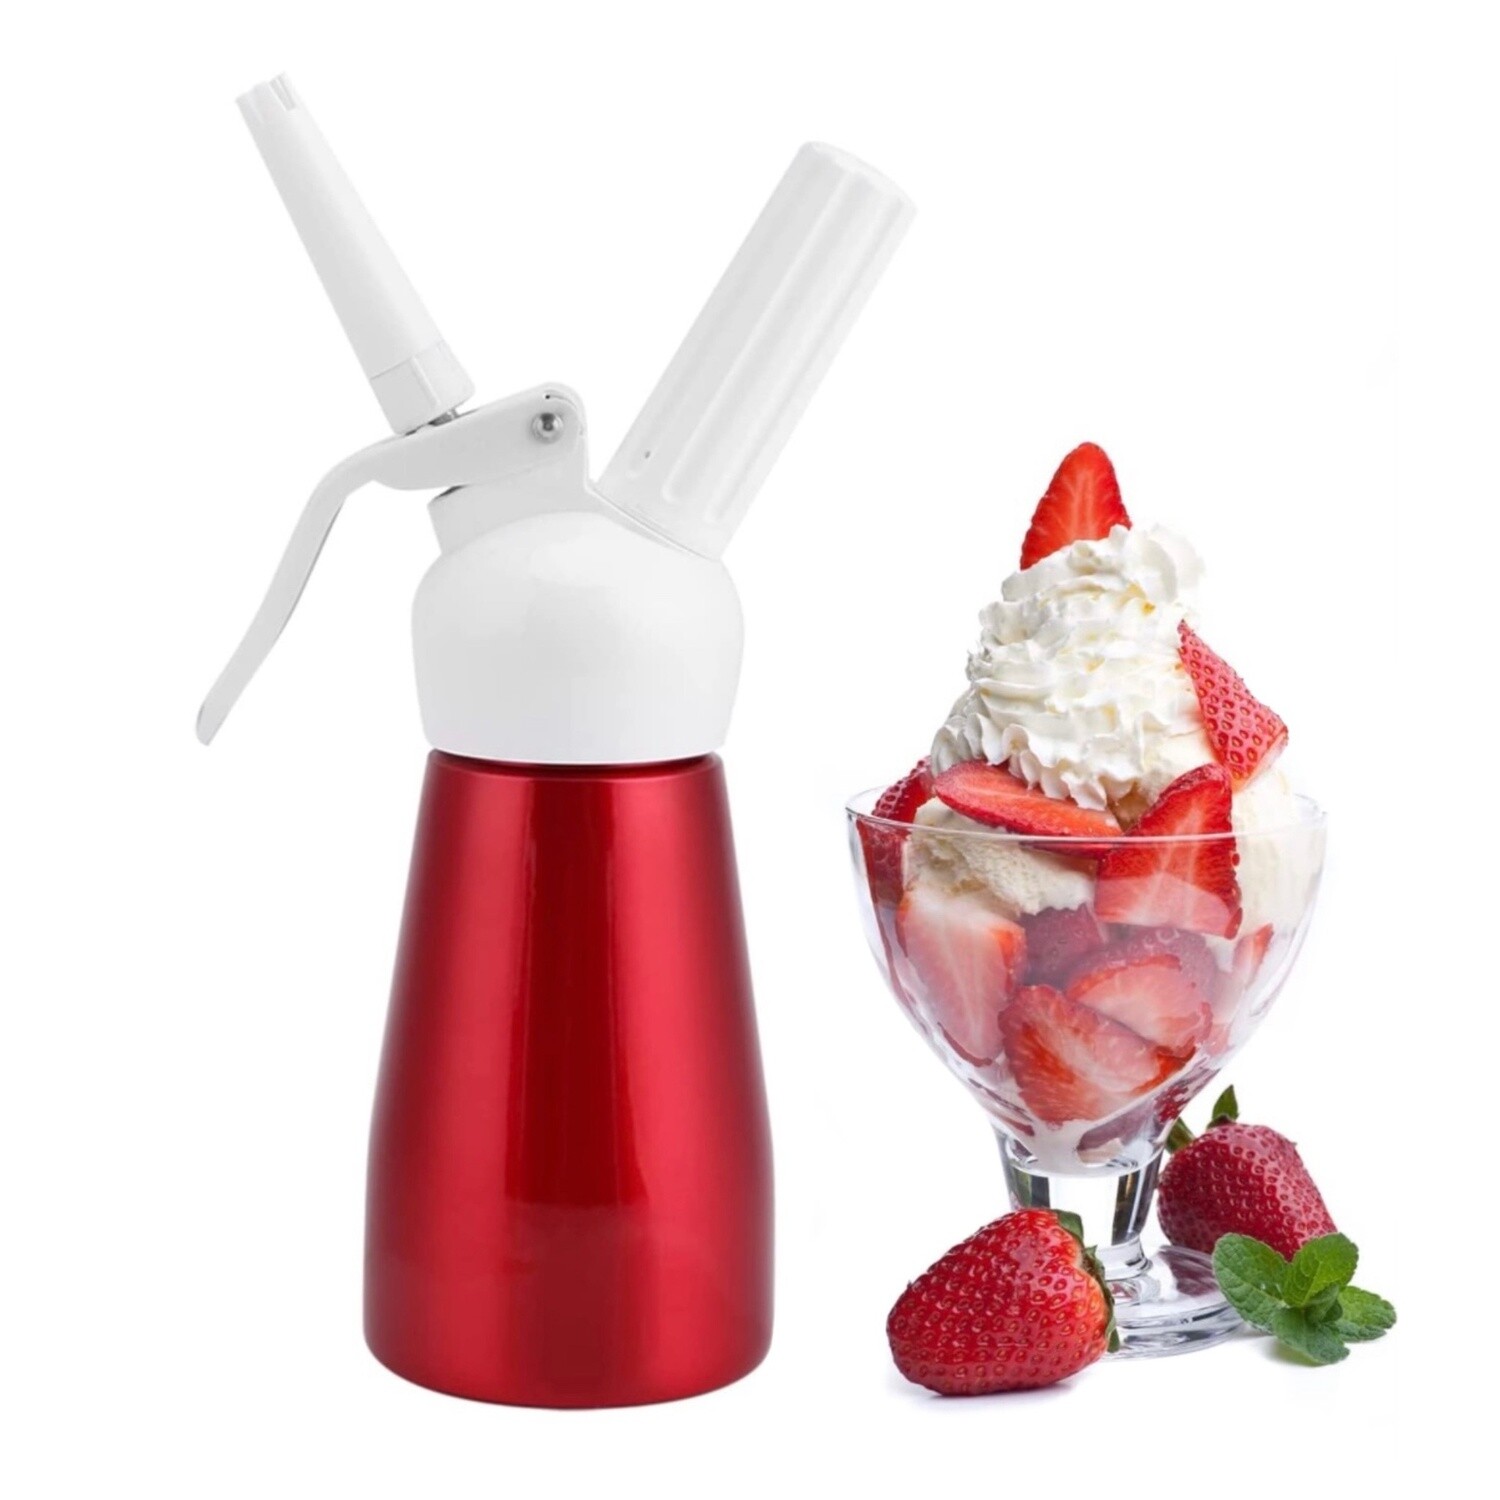 Best Whip™ Cream Whippers